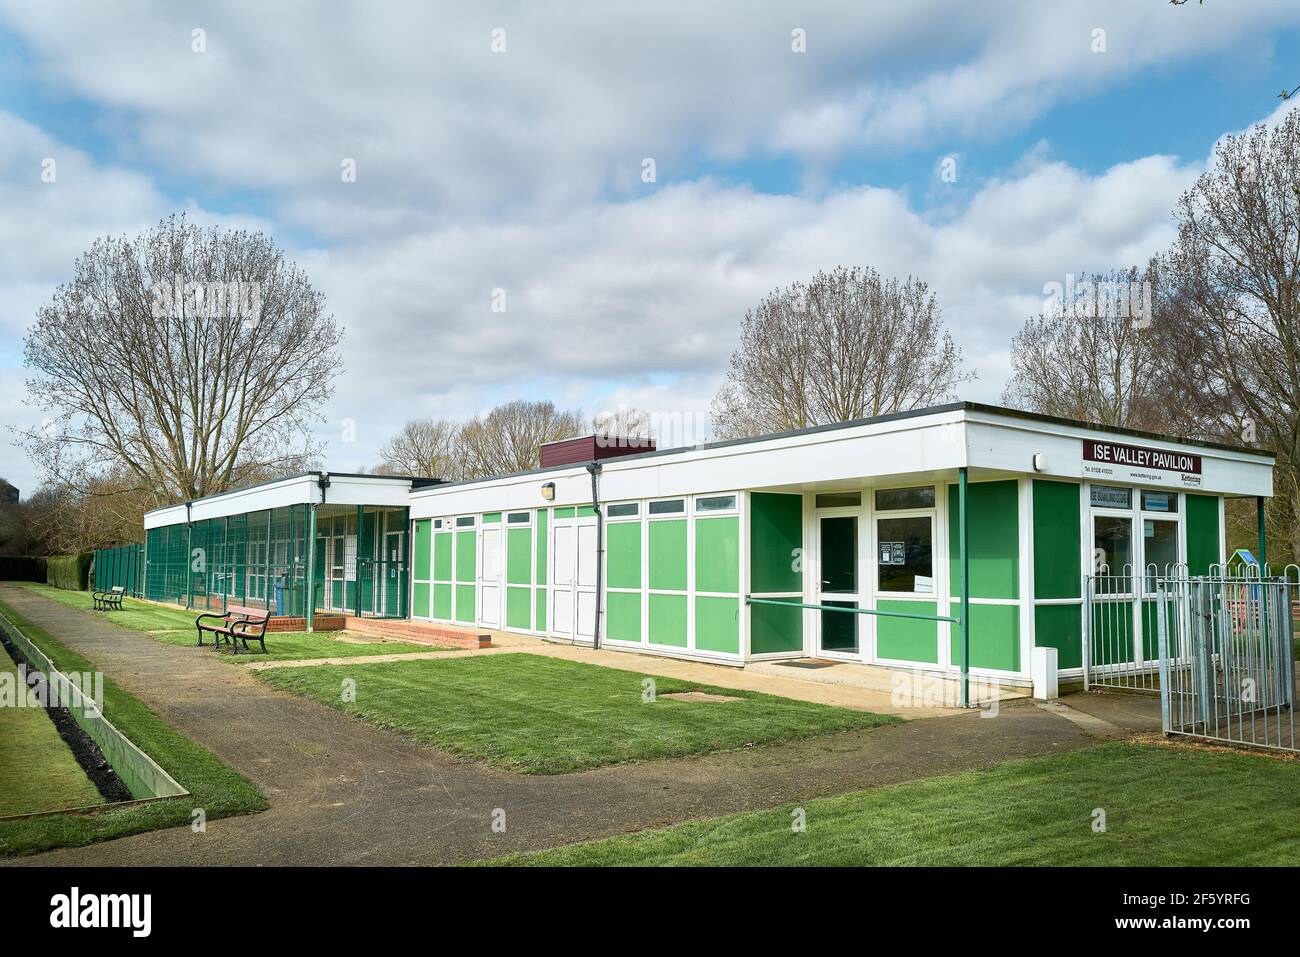 Ise Valley pavilion and bowling green, Kettering, England, closed during a national lockdown, march 2021, to prevent the spread of covid-19. Stock Photo